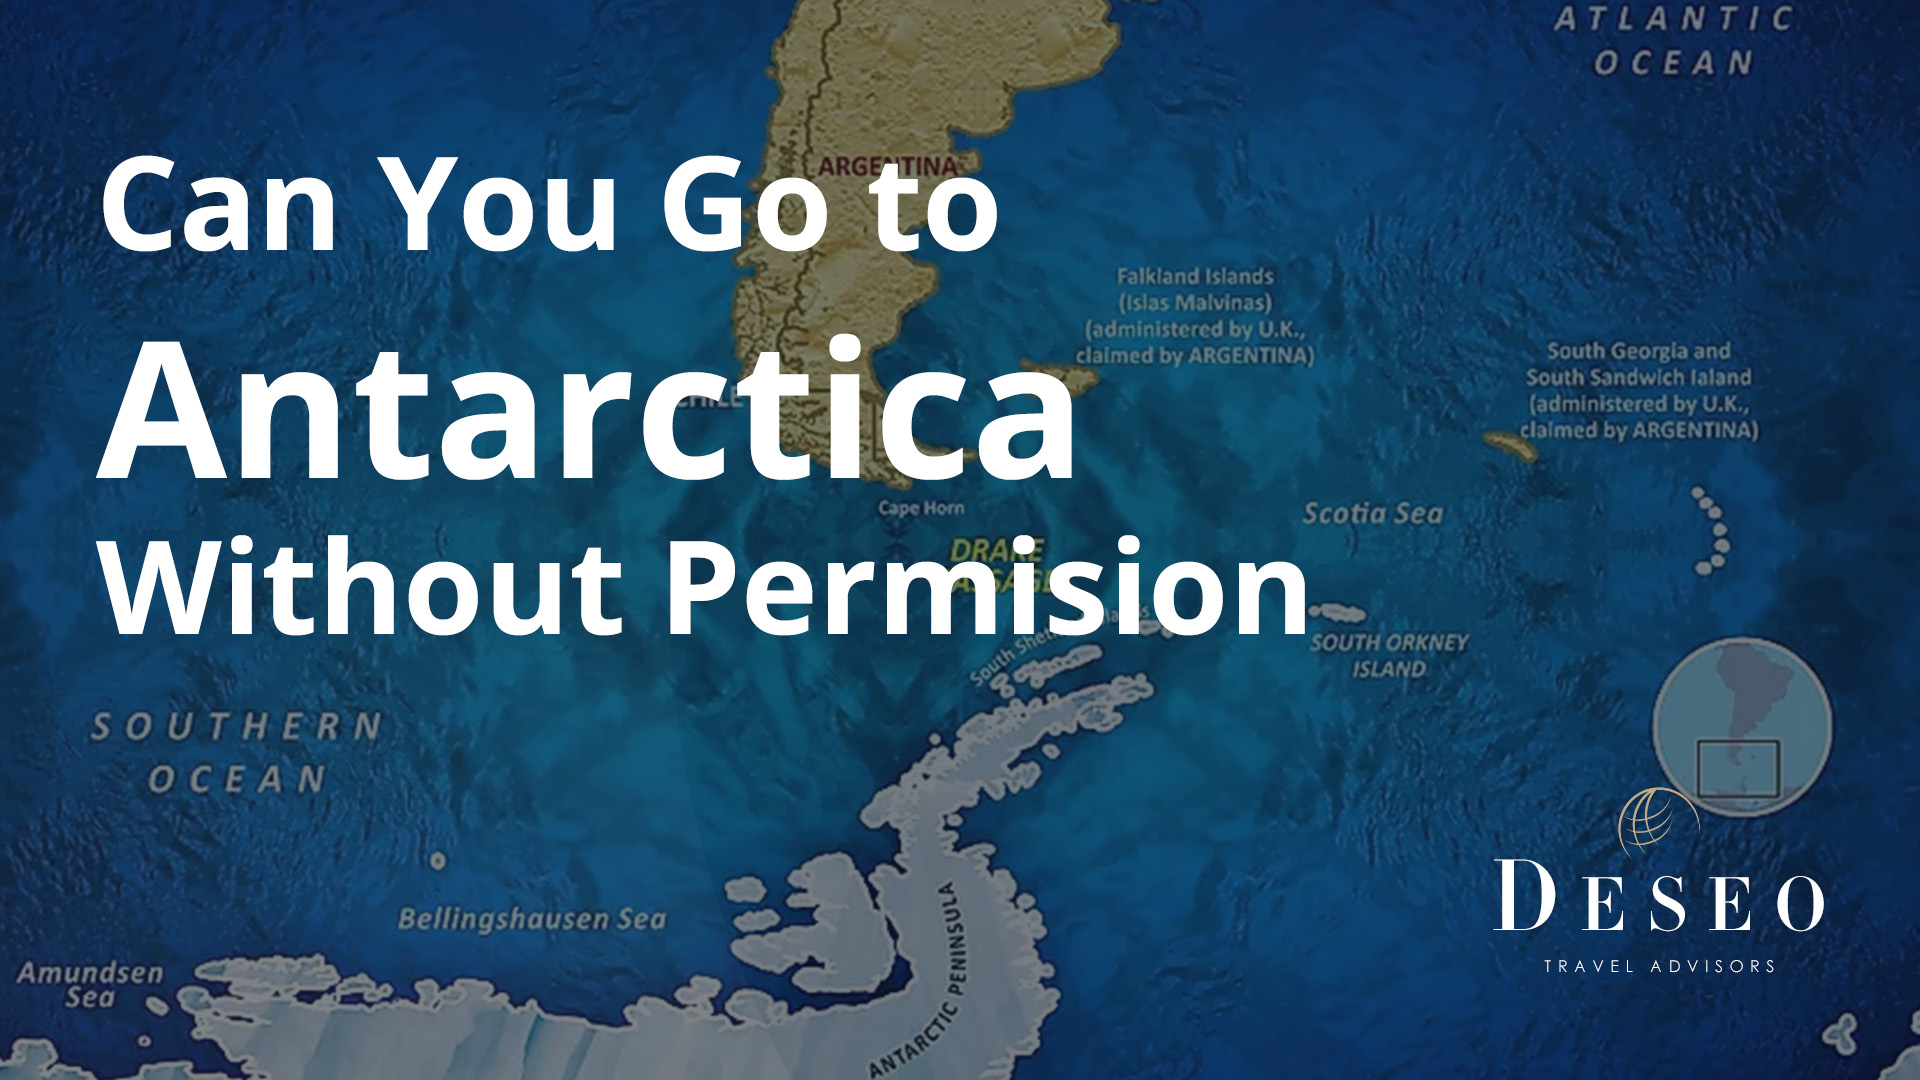 Can you go to Antarctica without permission?